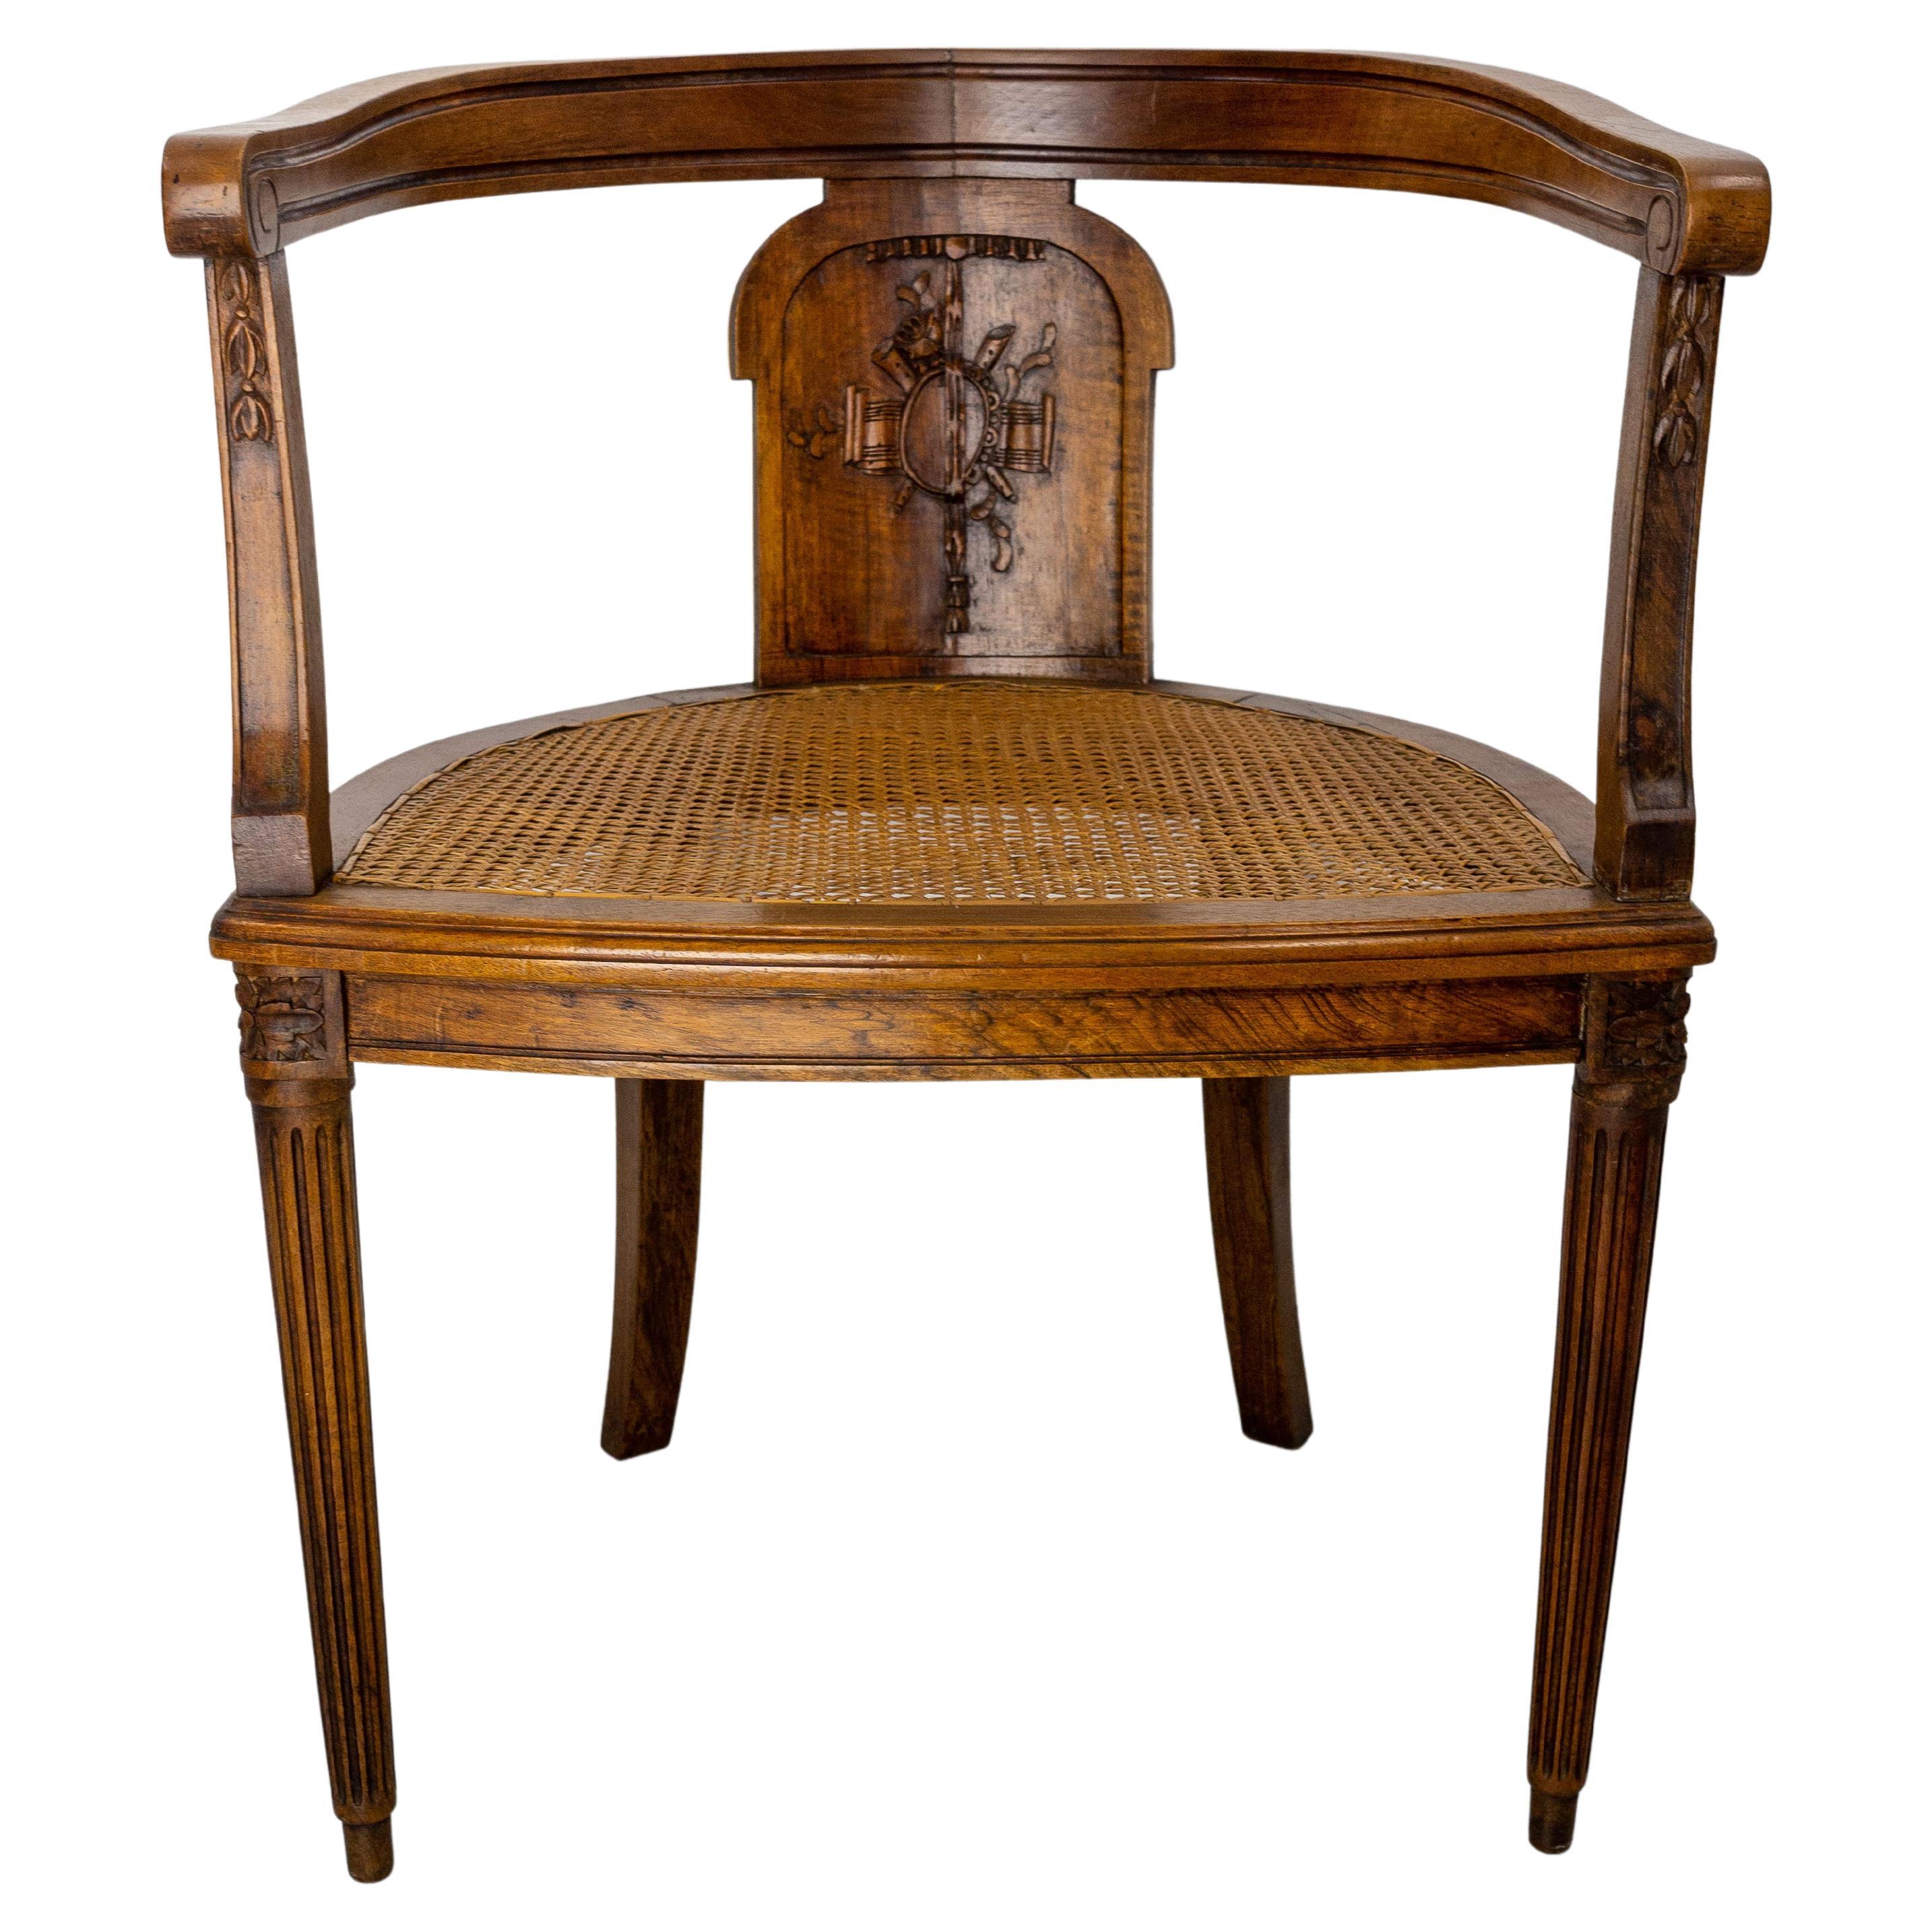 French Armchair carved in the Louis XVI style
Walnut and cane
On the back, a score, a tambourine and flutes are carved, ideal in a music room
Deliverer disassemble
Shipping :
60/69/44 cm 6.6 kg.